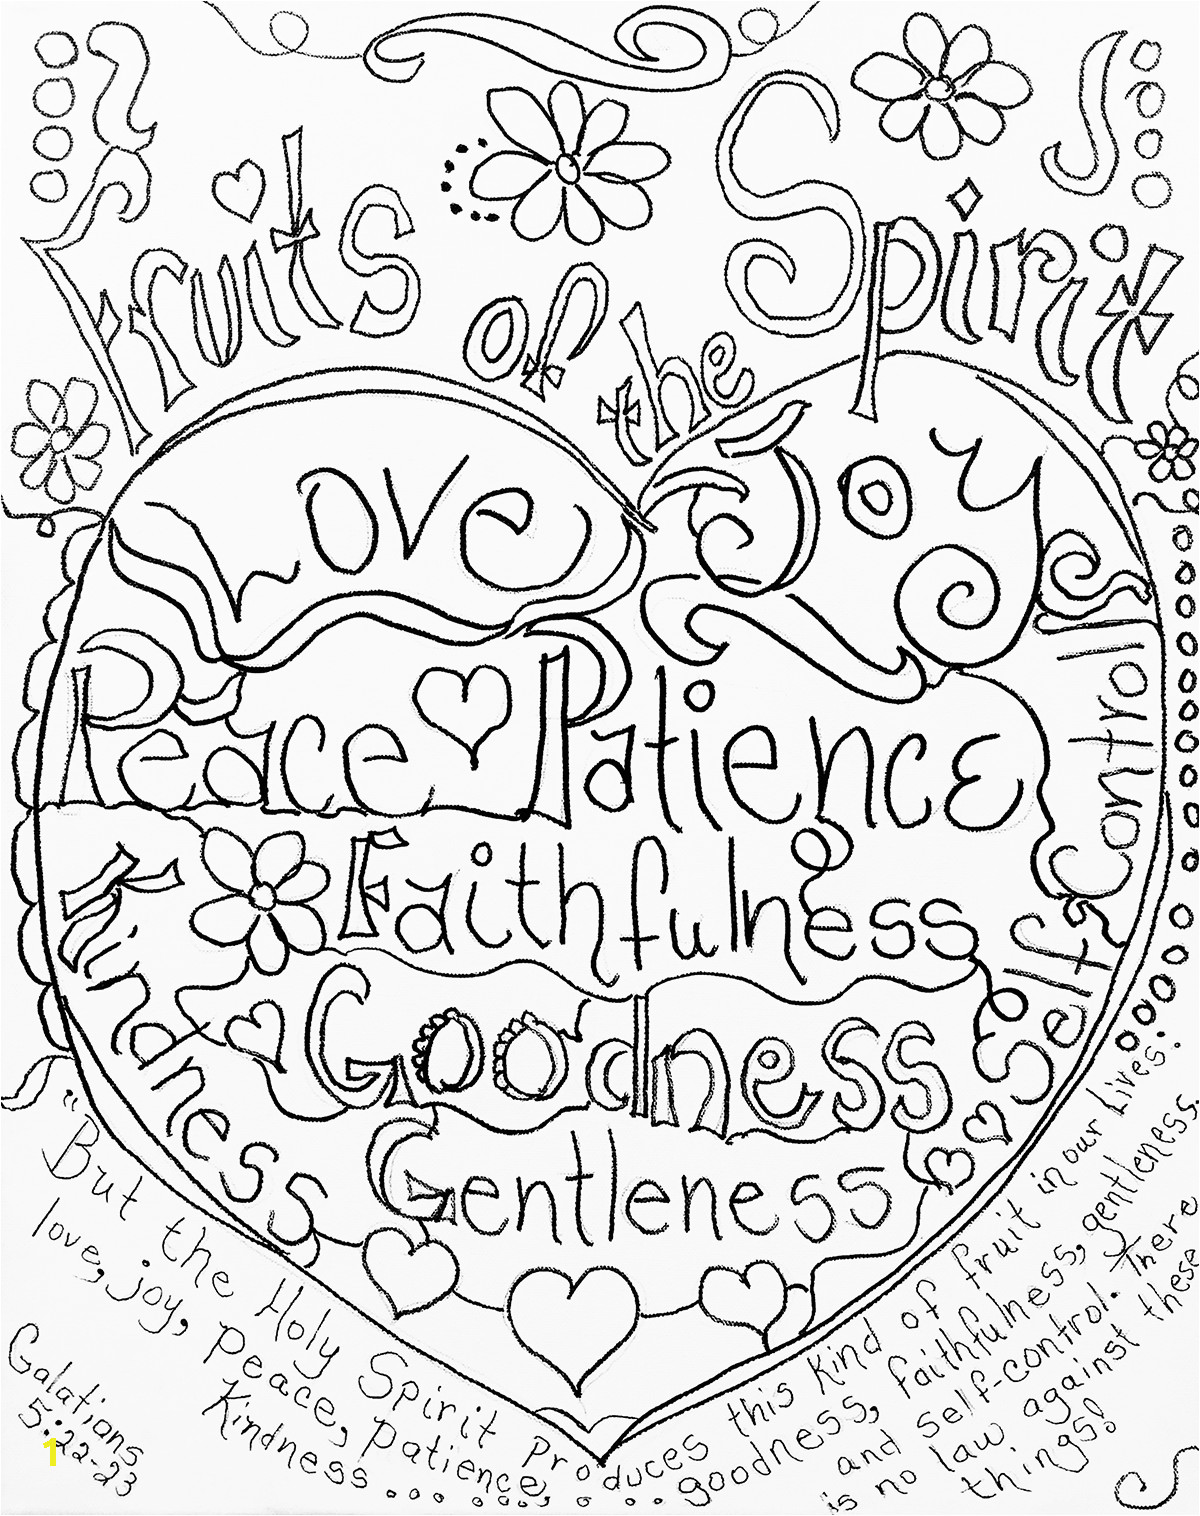 Joy Fruit Of the Spirit Coloring Page 134 Best Ksbc Images In 2019